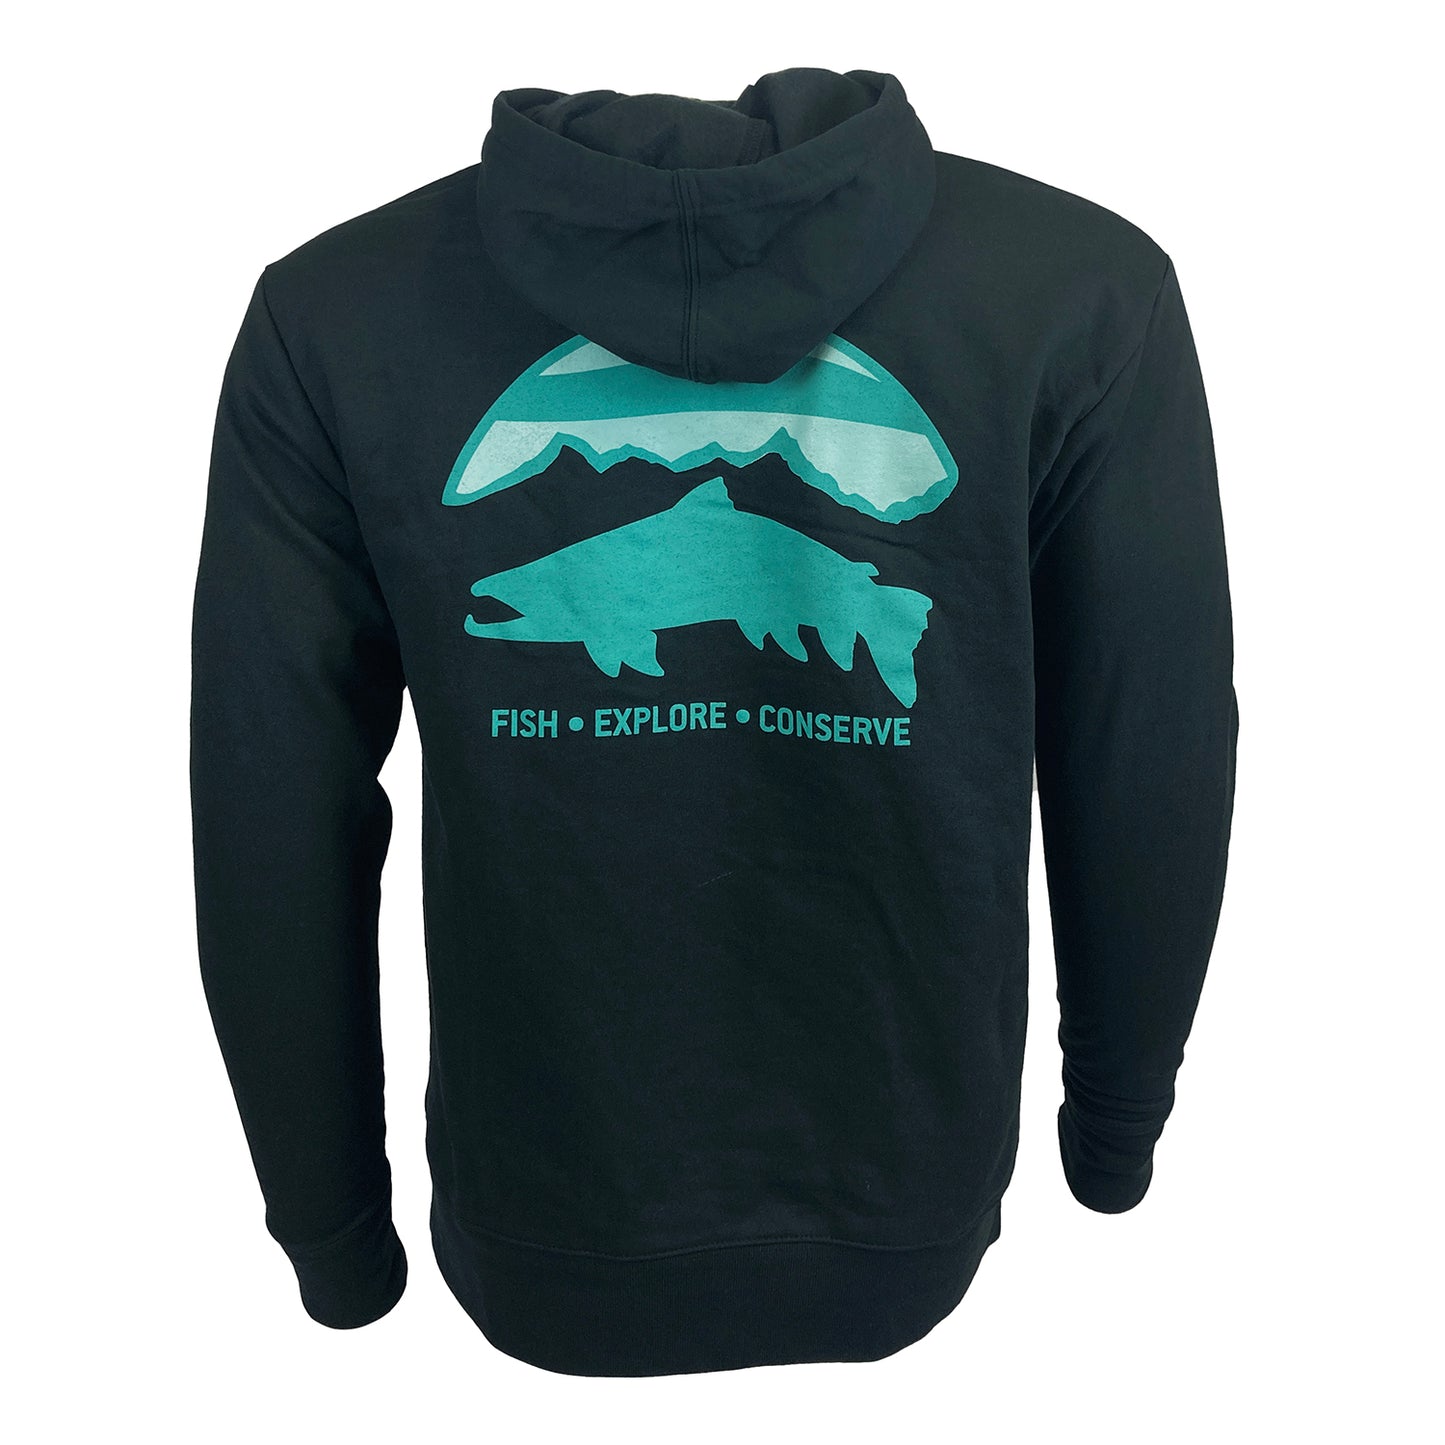 Black hoody shown from the rear with blue trout silhouette, mountains, and fish explore conserve across the shoulder blades.